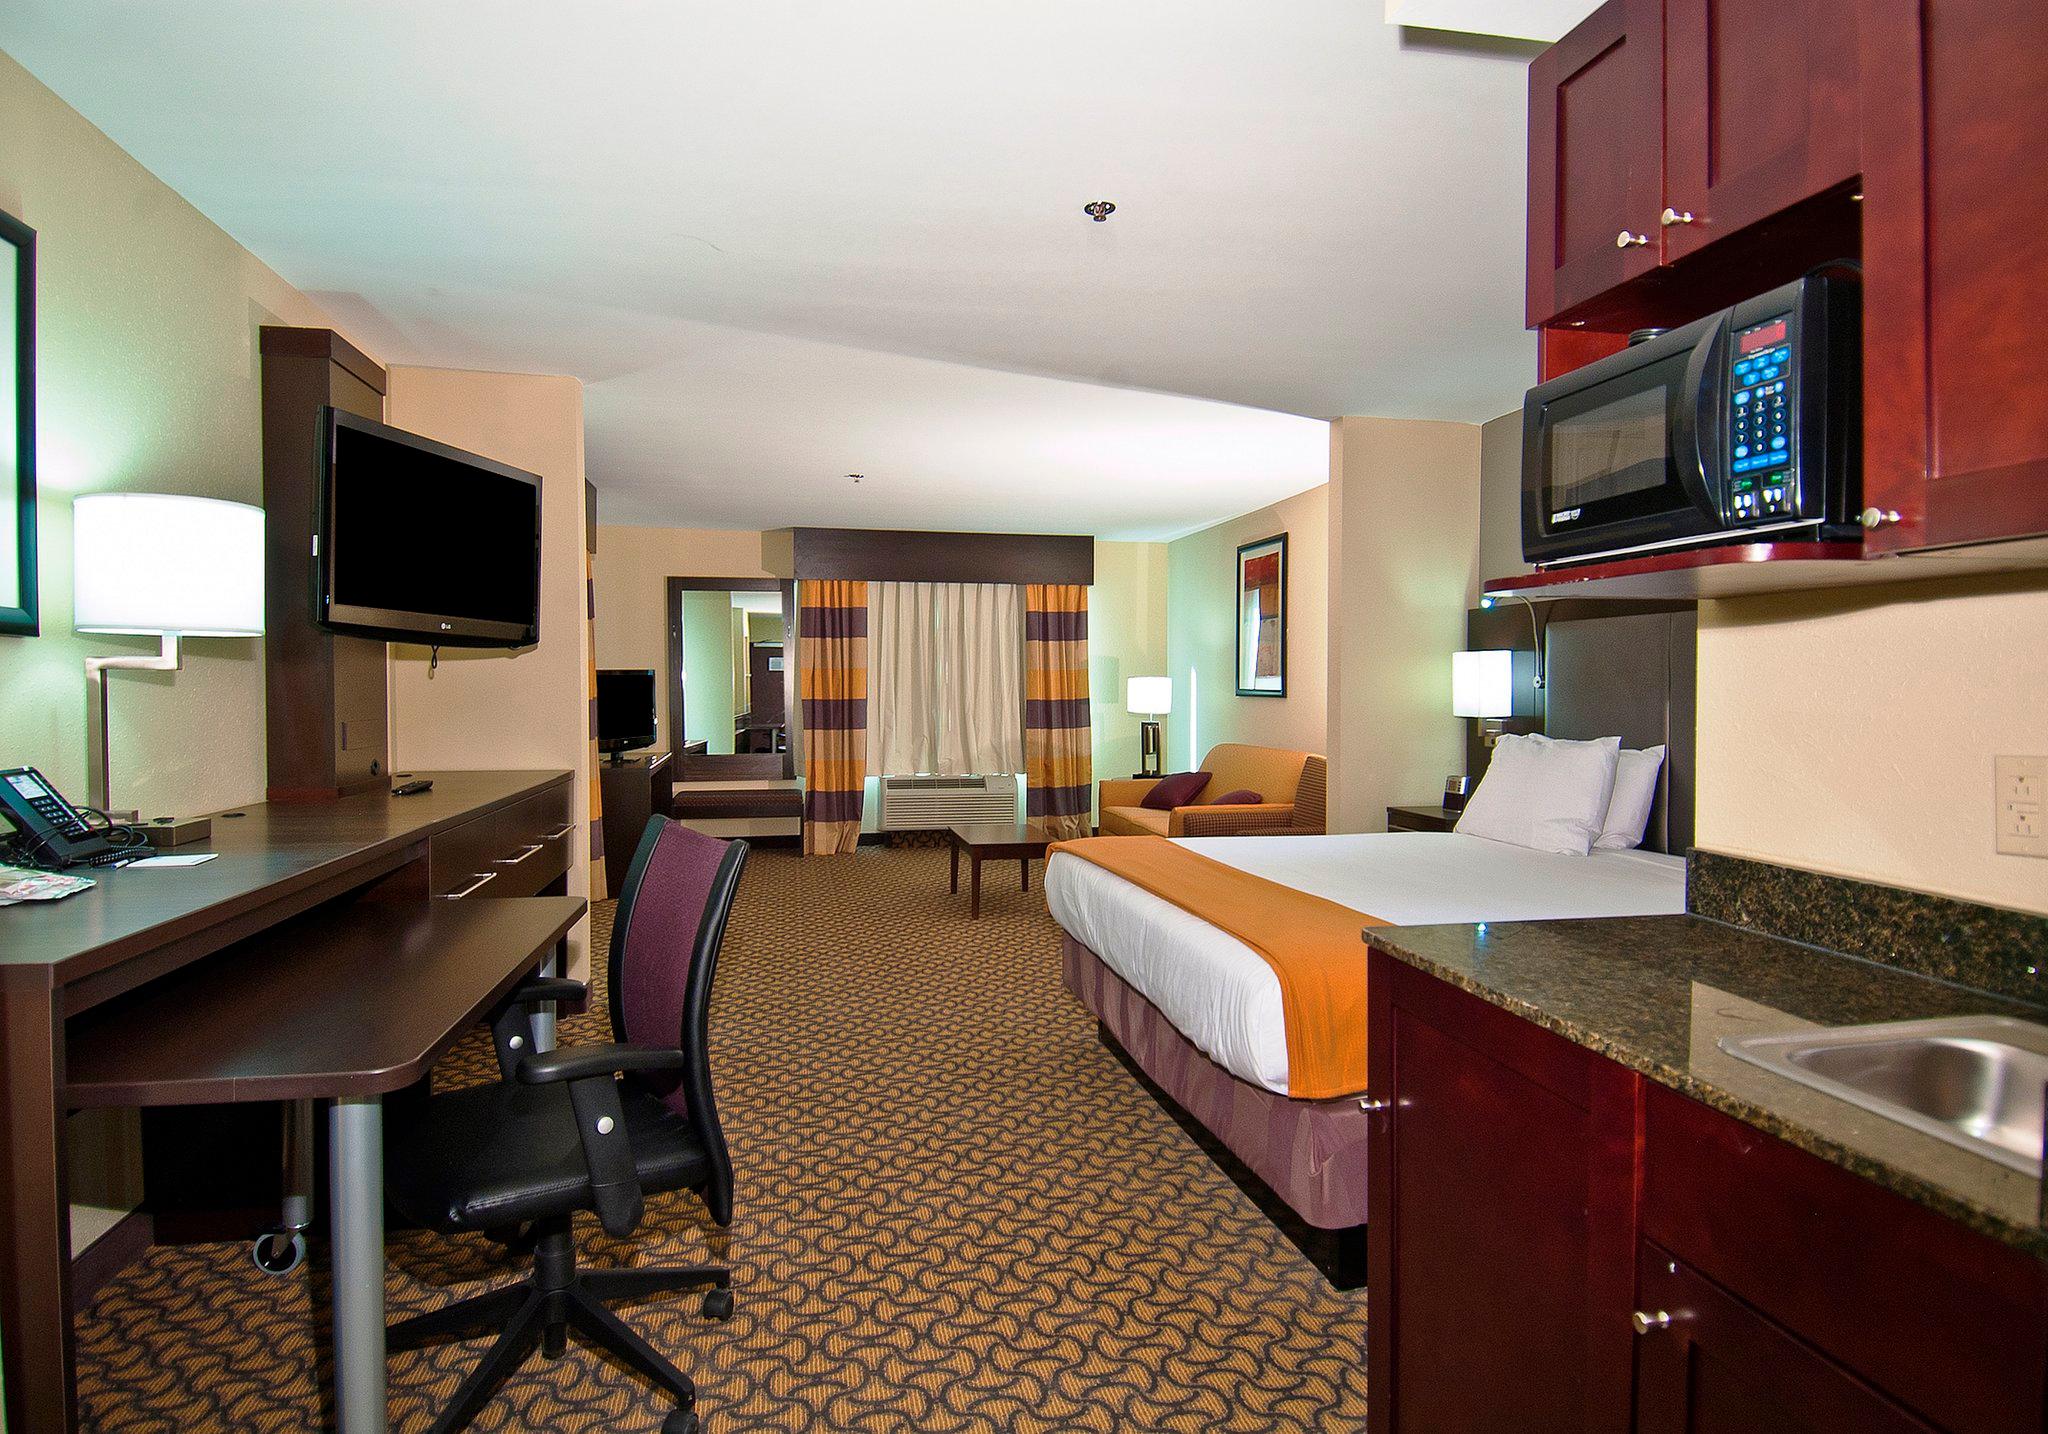 Holiday Inn Express & Suites Jackson/Pearl Intl Airport Photo